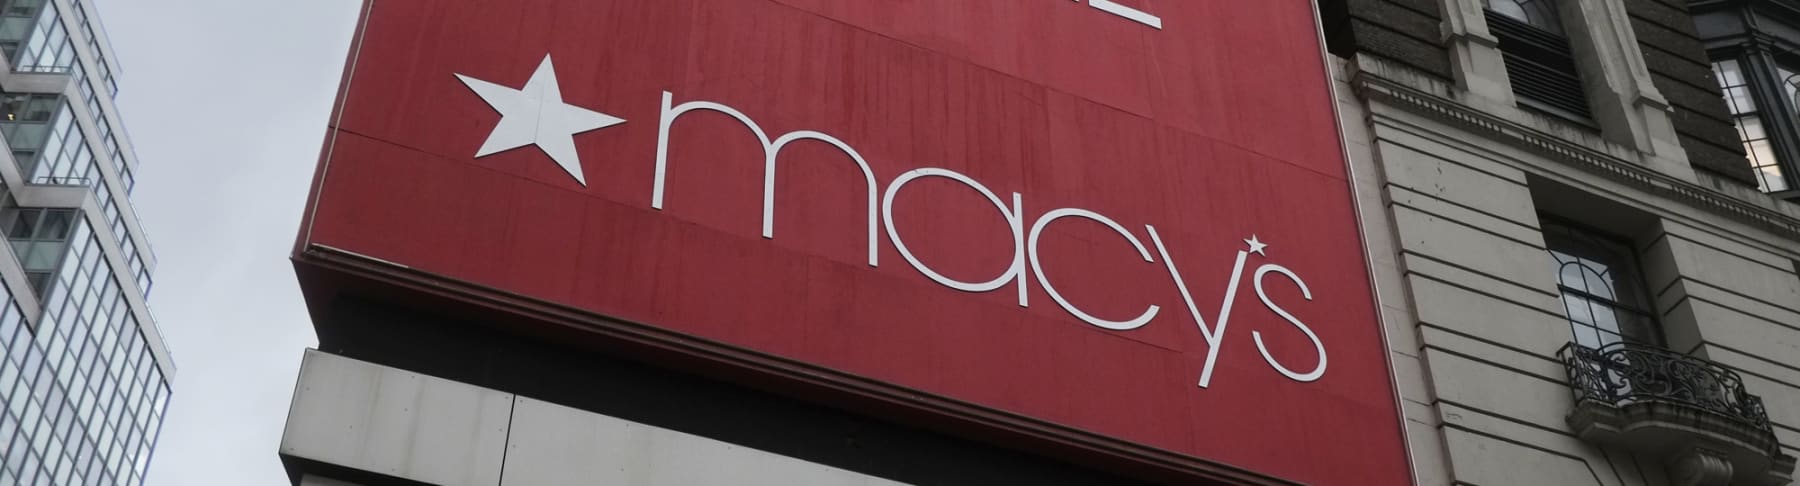 Macy's sign is shown on side of building.